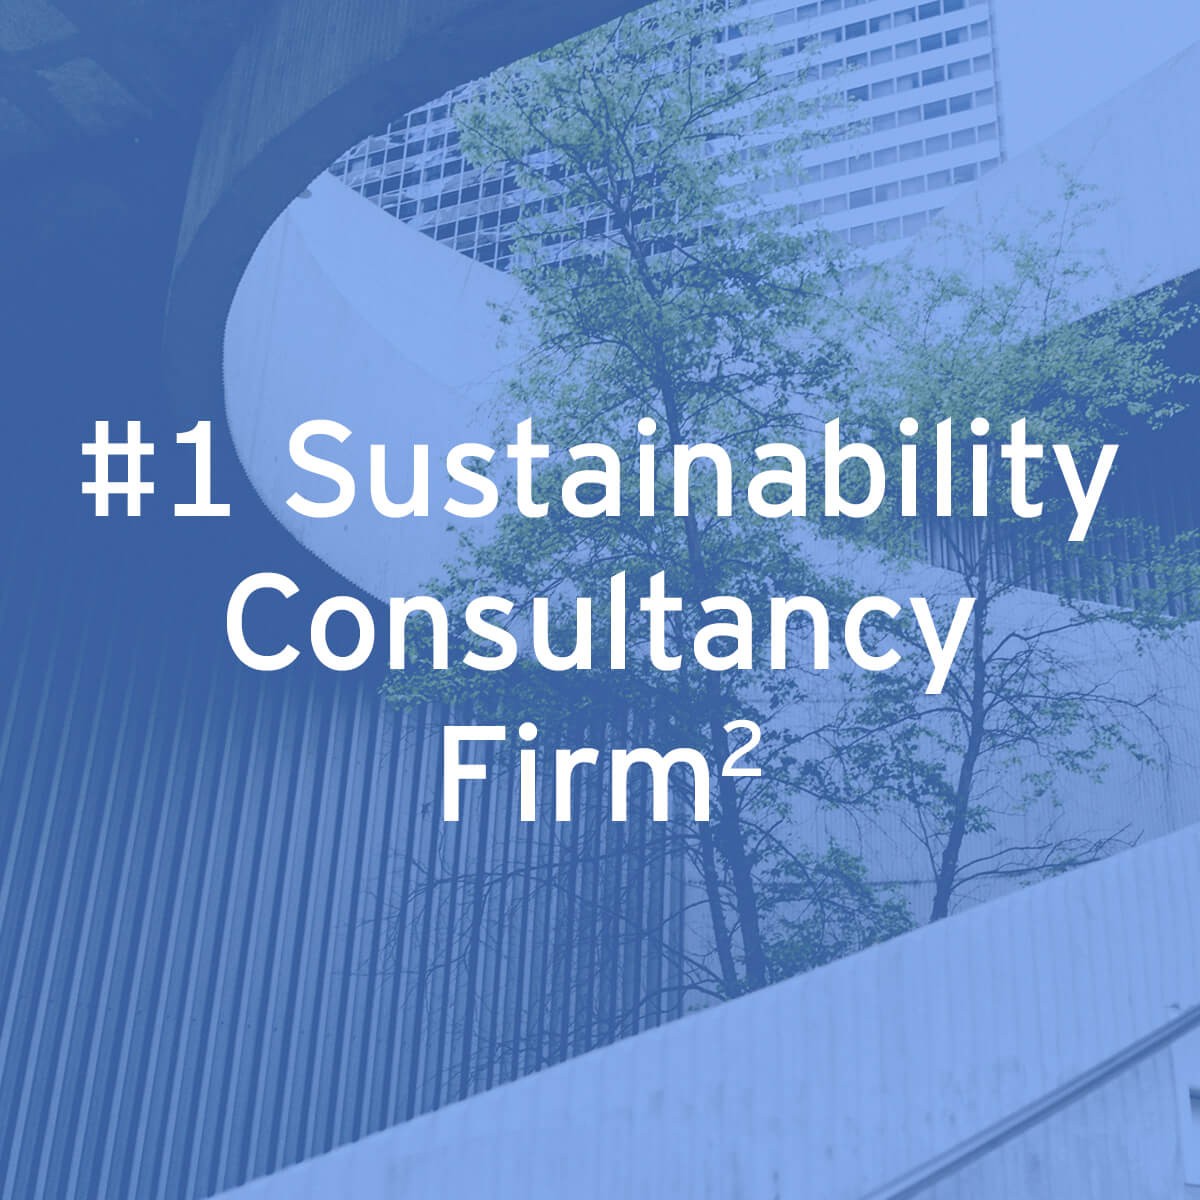 EY - #1 Sustainability Consultancy Firm